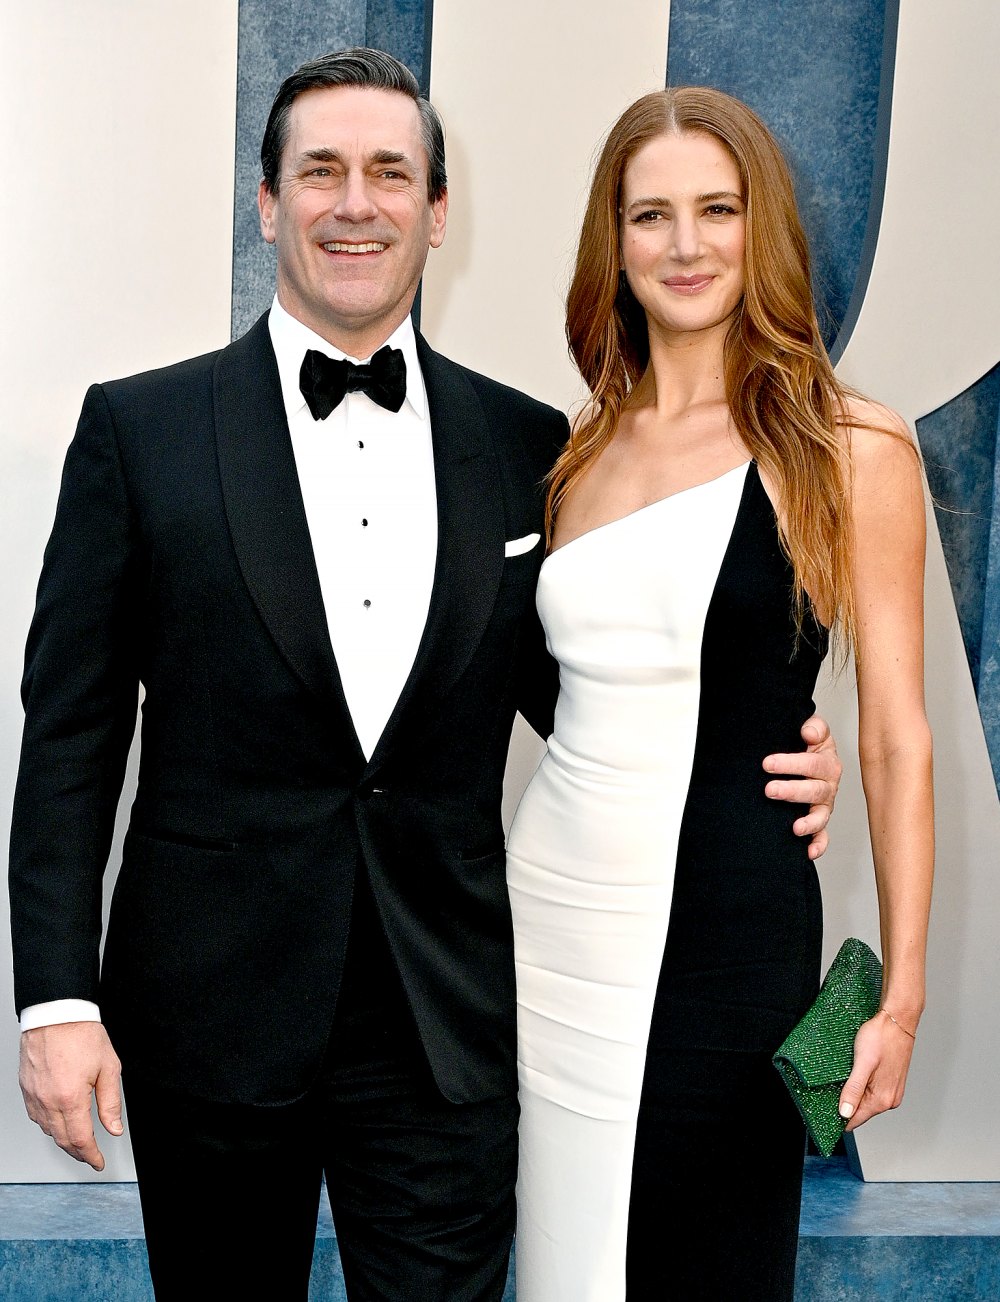 Jon Hamm and Anna Osceola Are Still in the Newlywed Stage After Wedding: She Is ‘His No. 1 Priority’